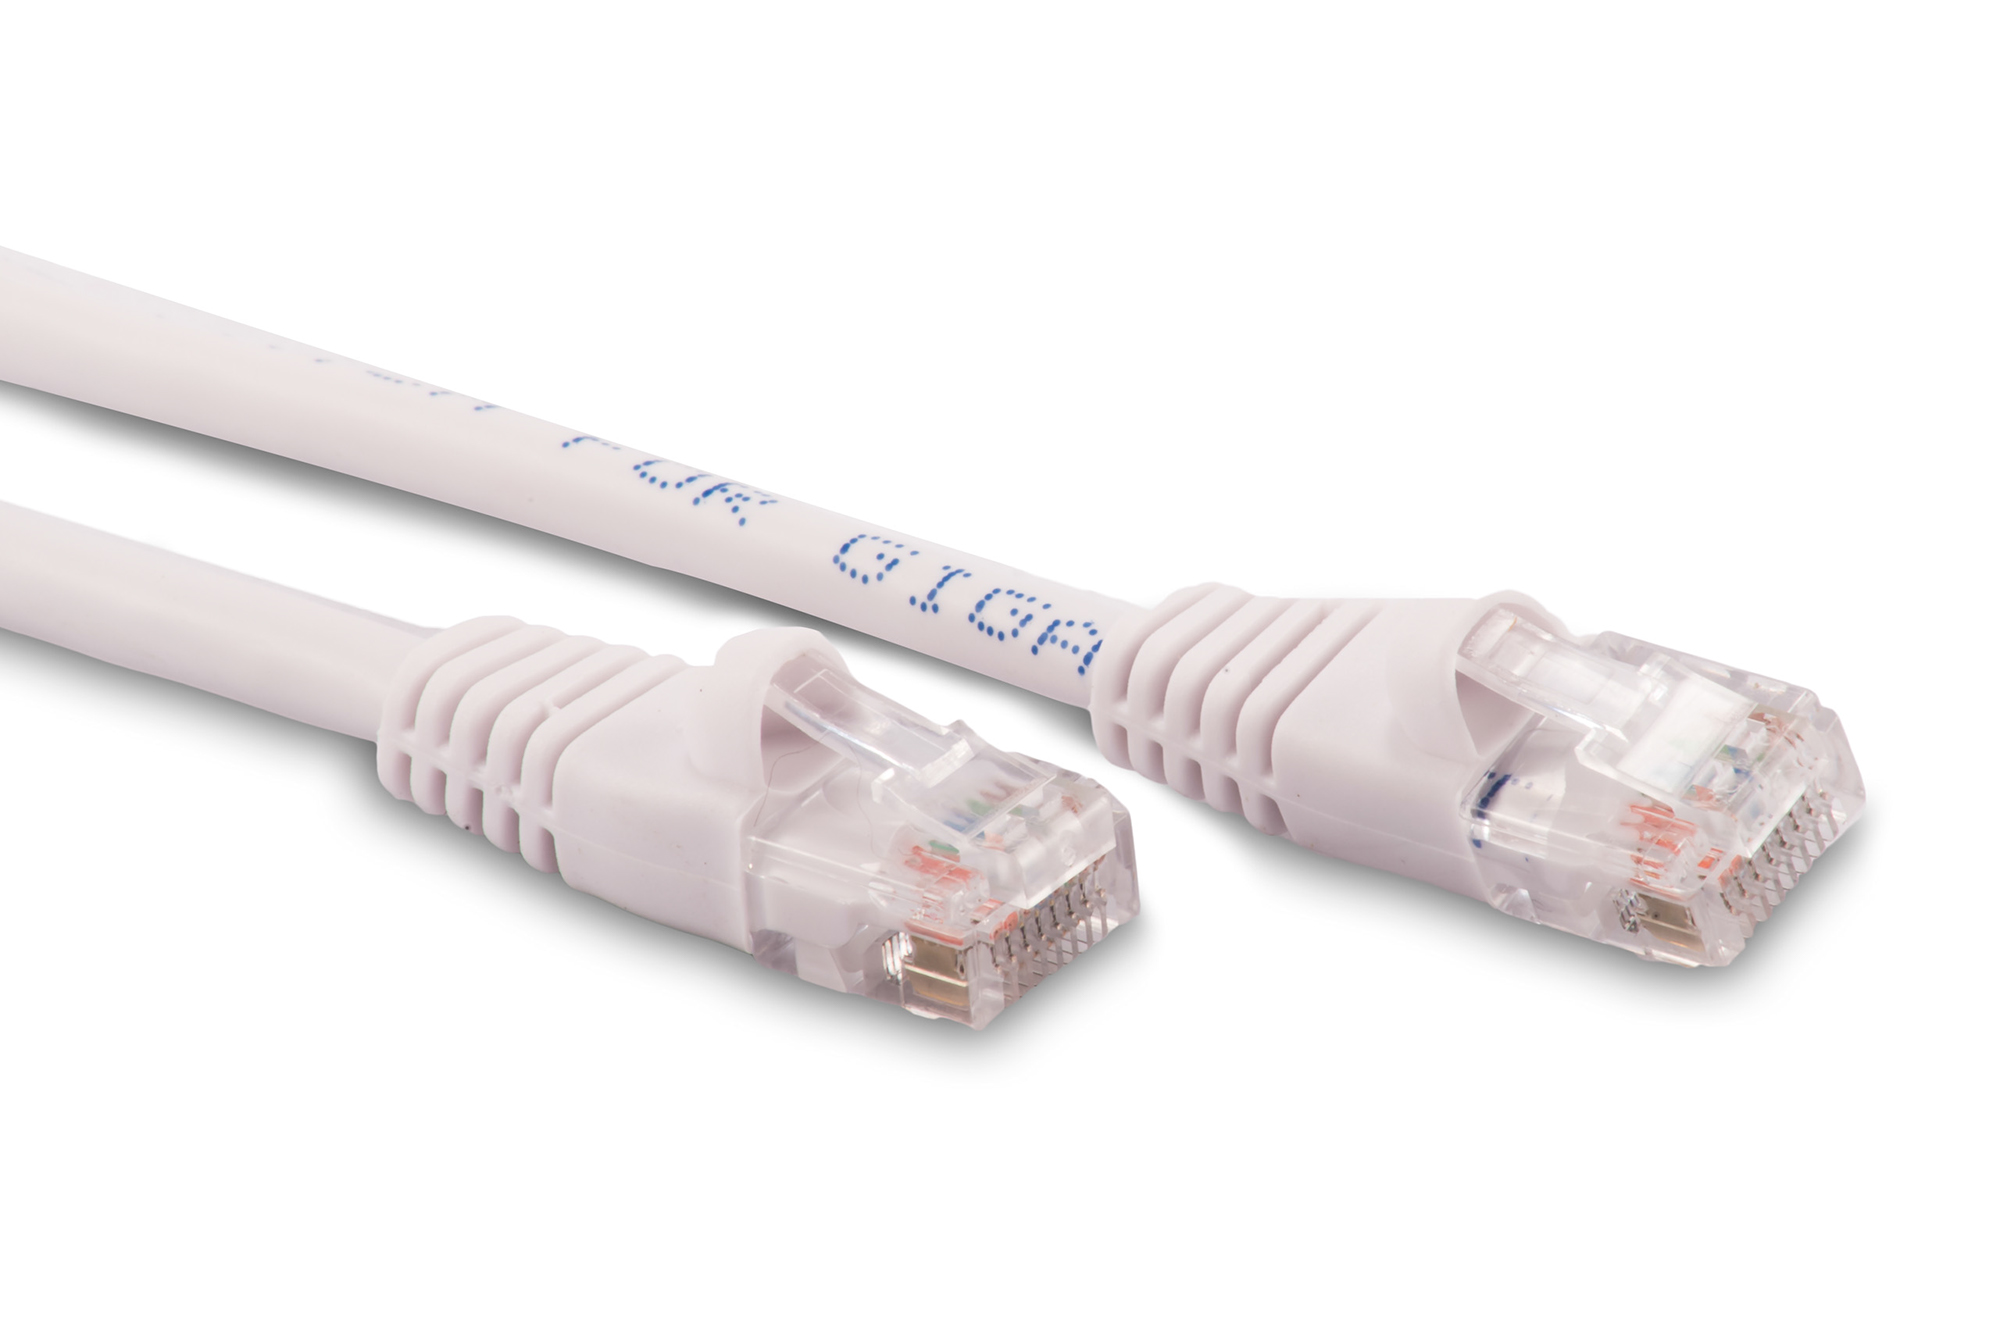 10ft Cat5e Ethernet Patch Cable - White Color - Snagless Boot